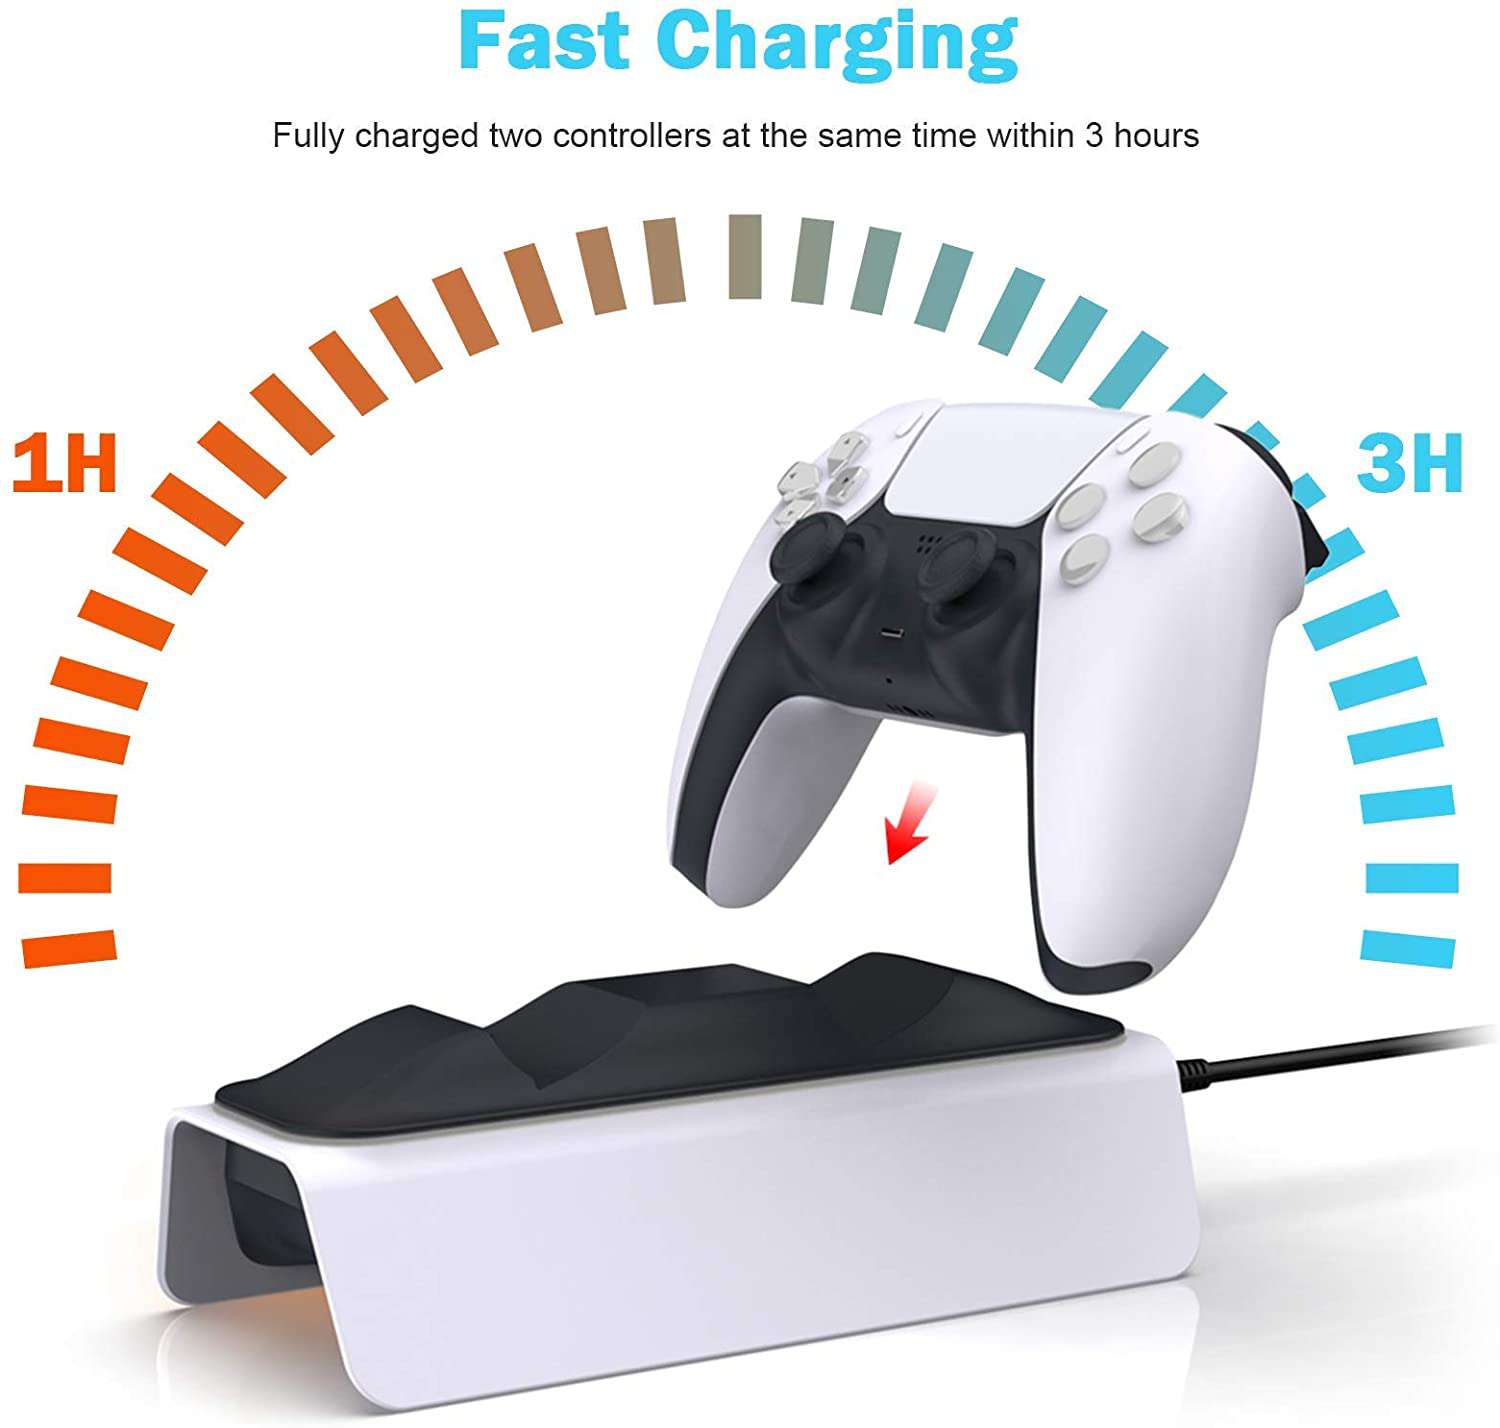 3-hour fast charging for full controller battery capacity.